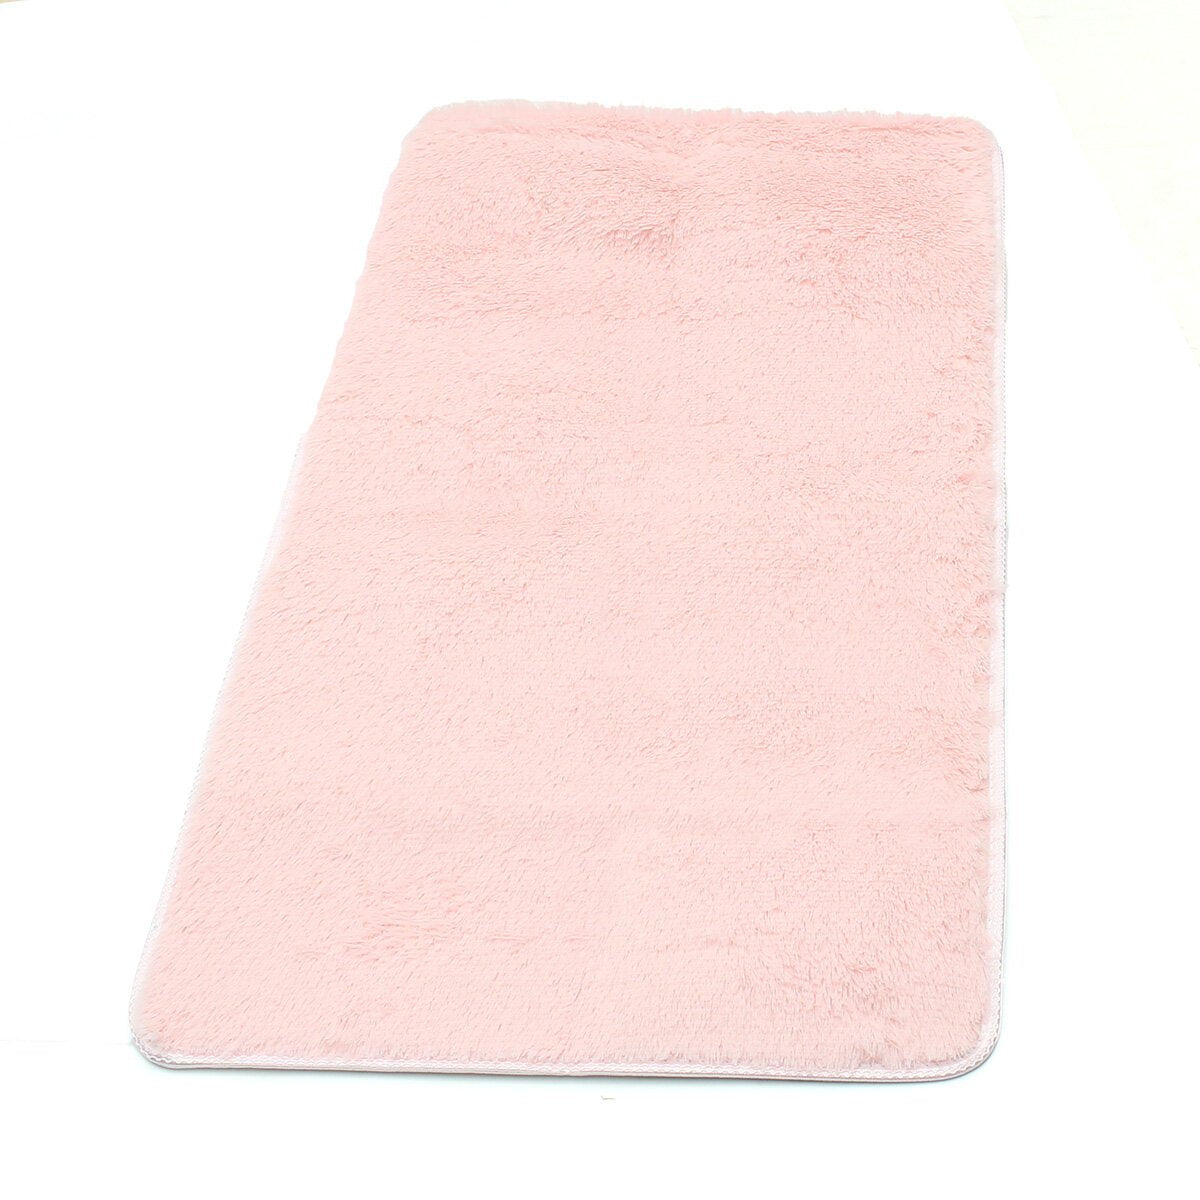 Ultra Soft Fluffy Area Rugs for Bedroom Kids Room Plush Shaggy Nursery Rug Furry Throw Carpets for College Dorm Fuzzy Rugs Living Room Home Decorate Rug